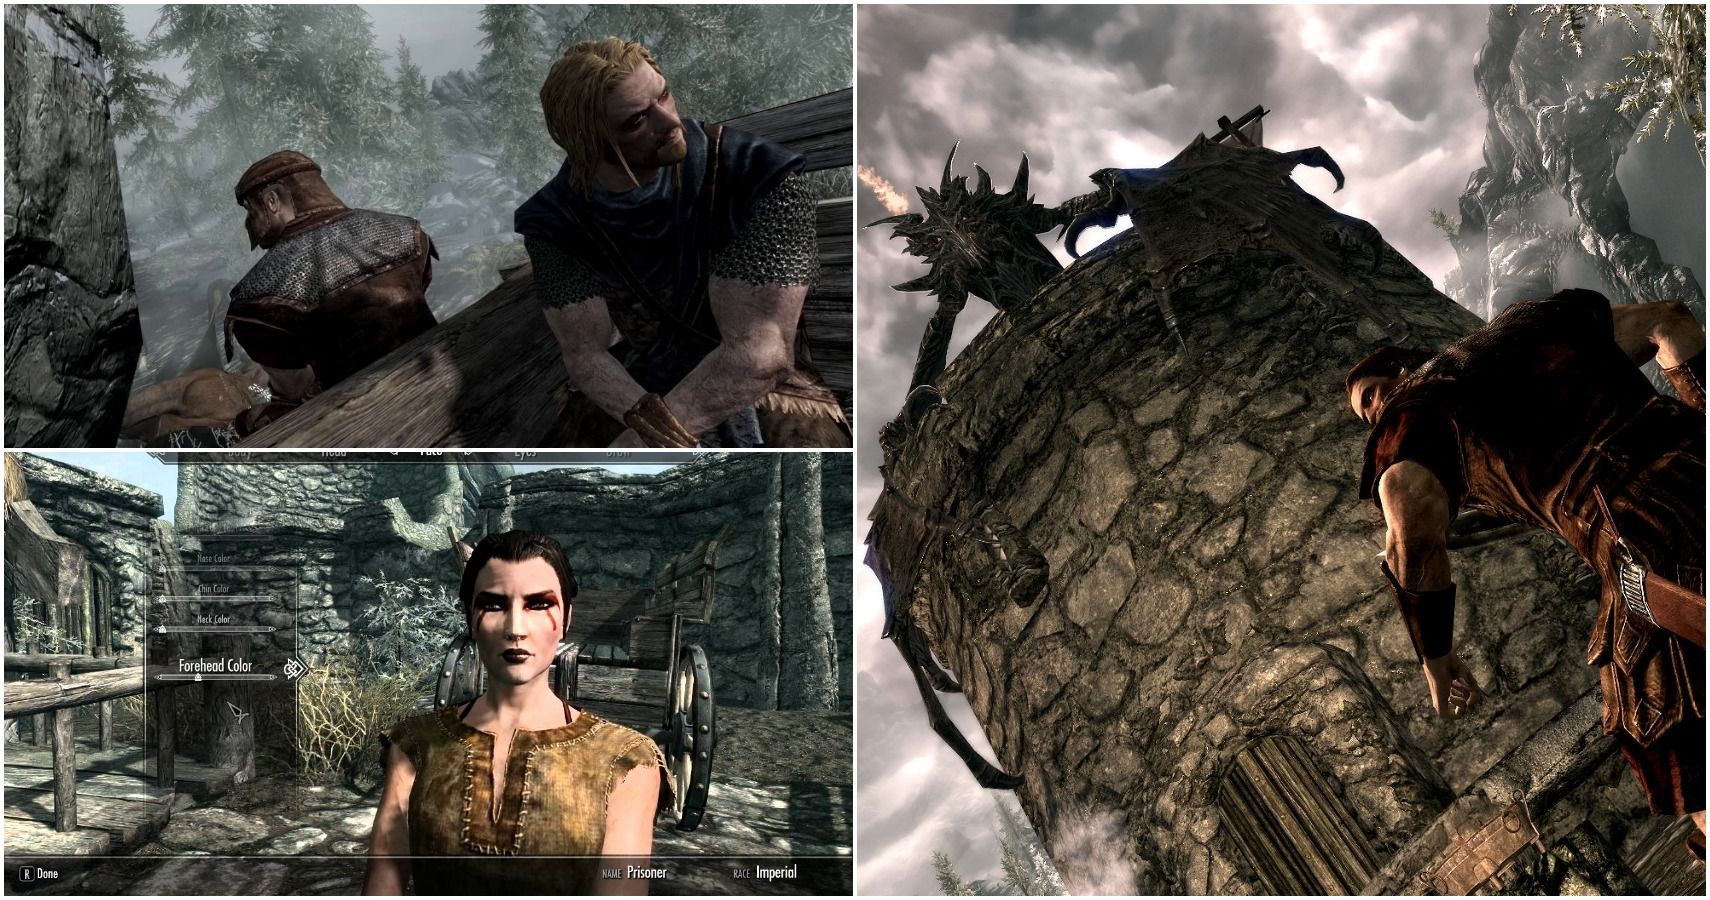 most expensive item in skyrim